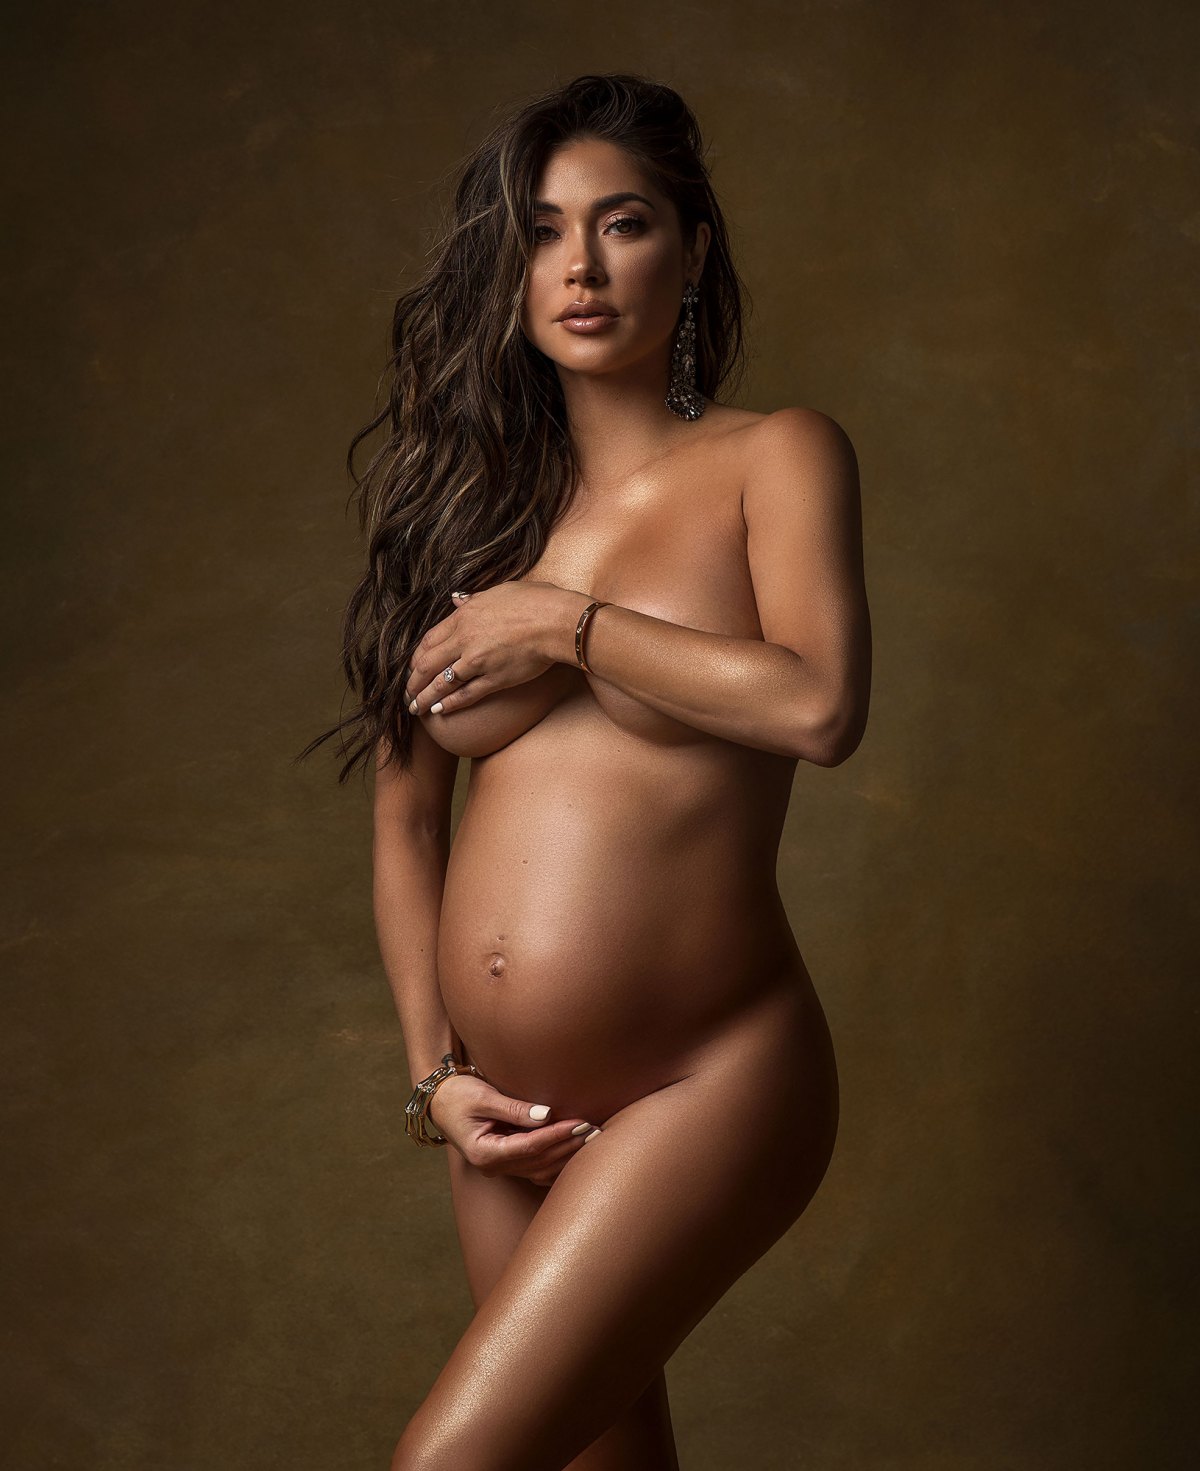 Long Hair Pregnant Nude - Celebrities Posing Nude While Pregnant: Maternity Pics